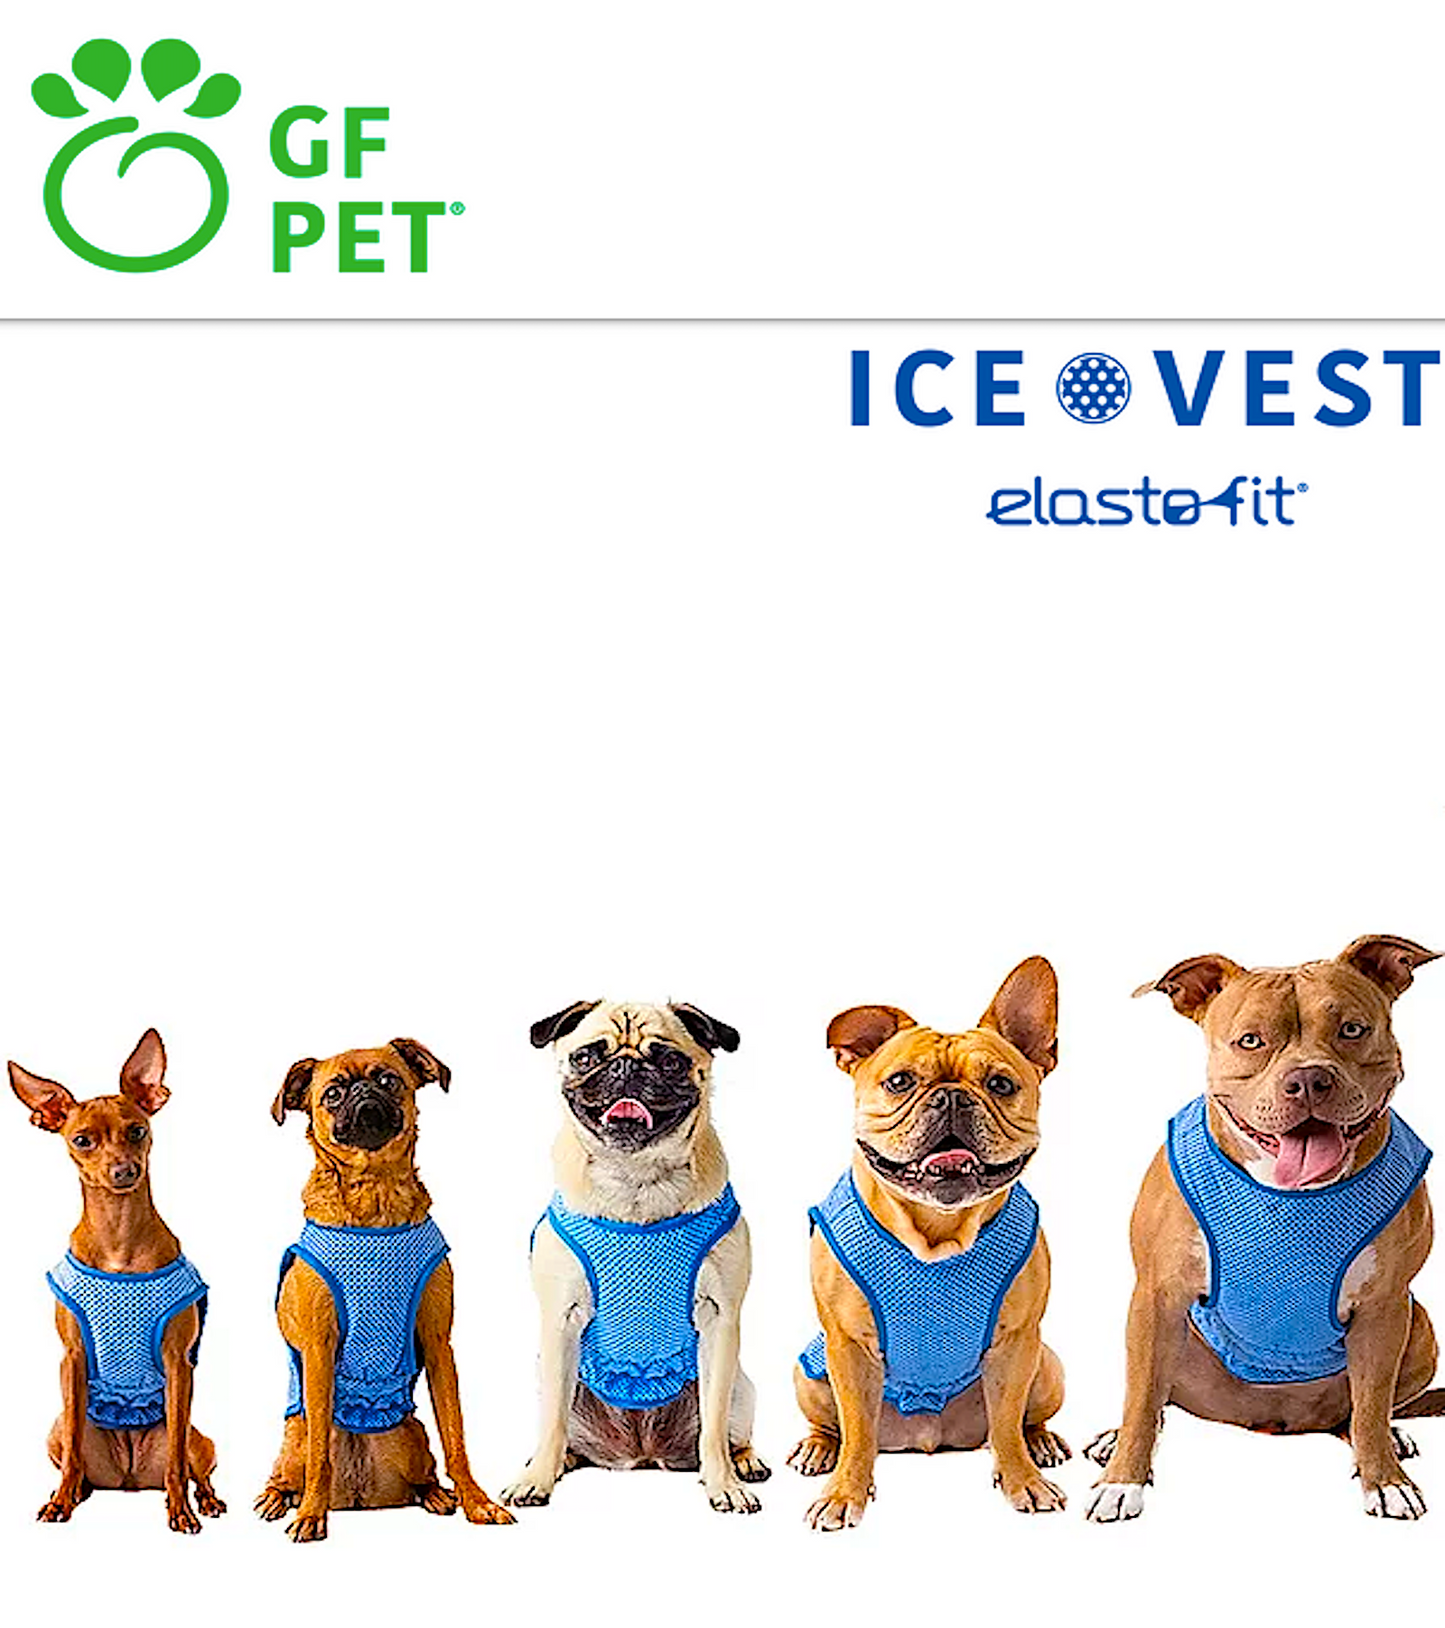 GF PET ICE VEST: keeps dogs from overheating during work and hot days